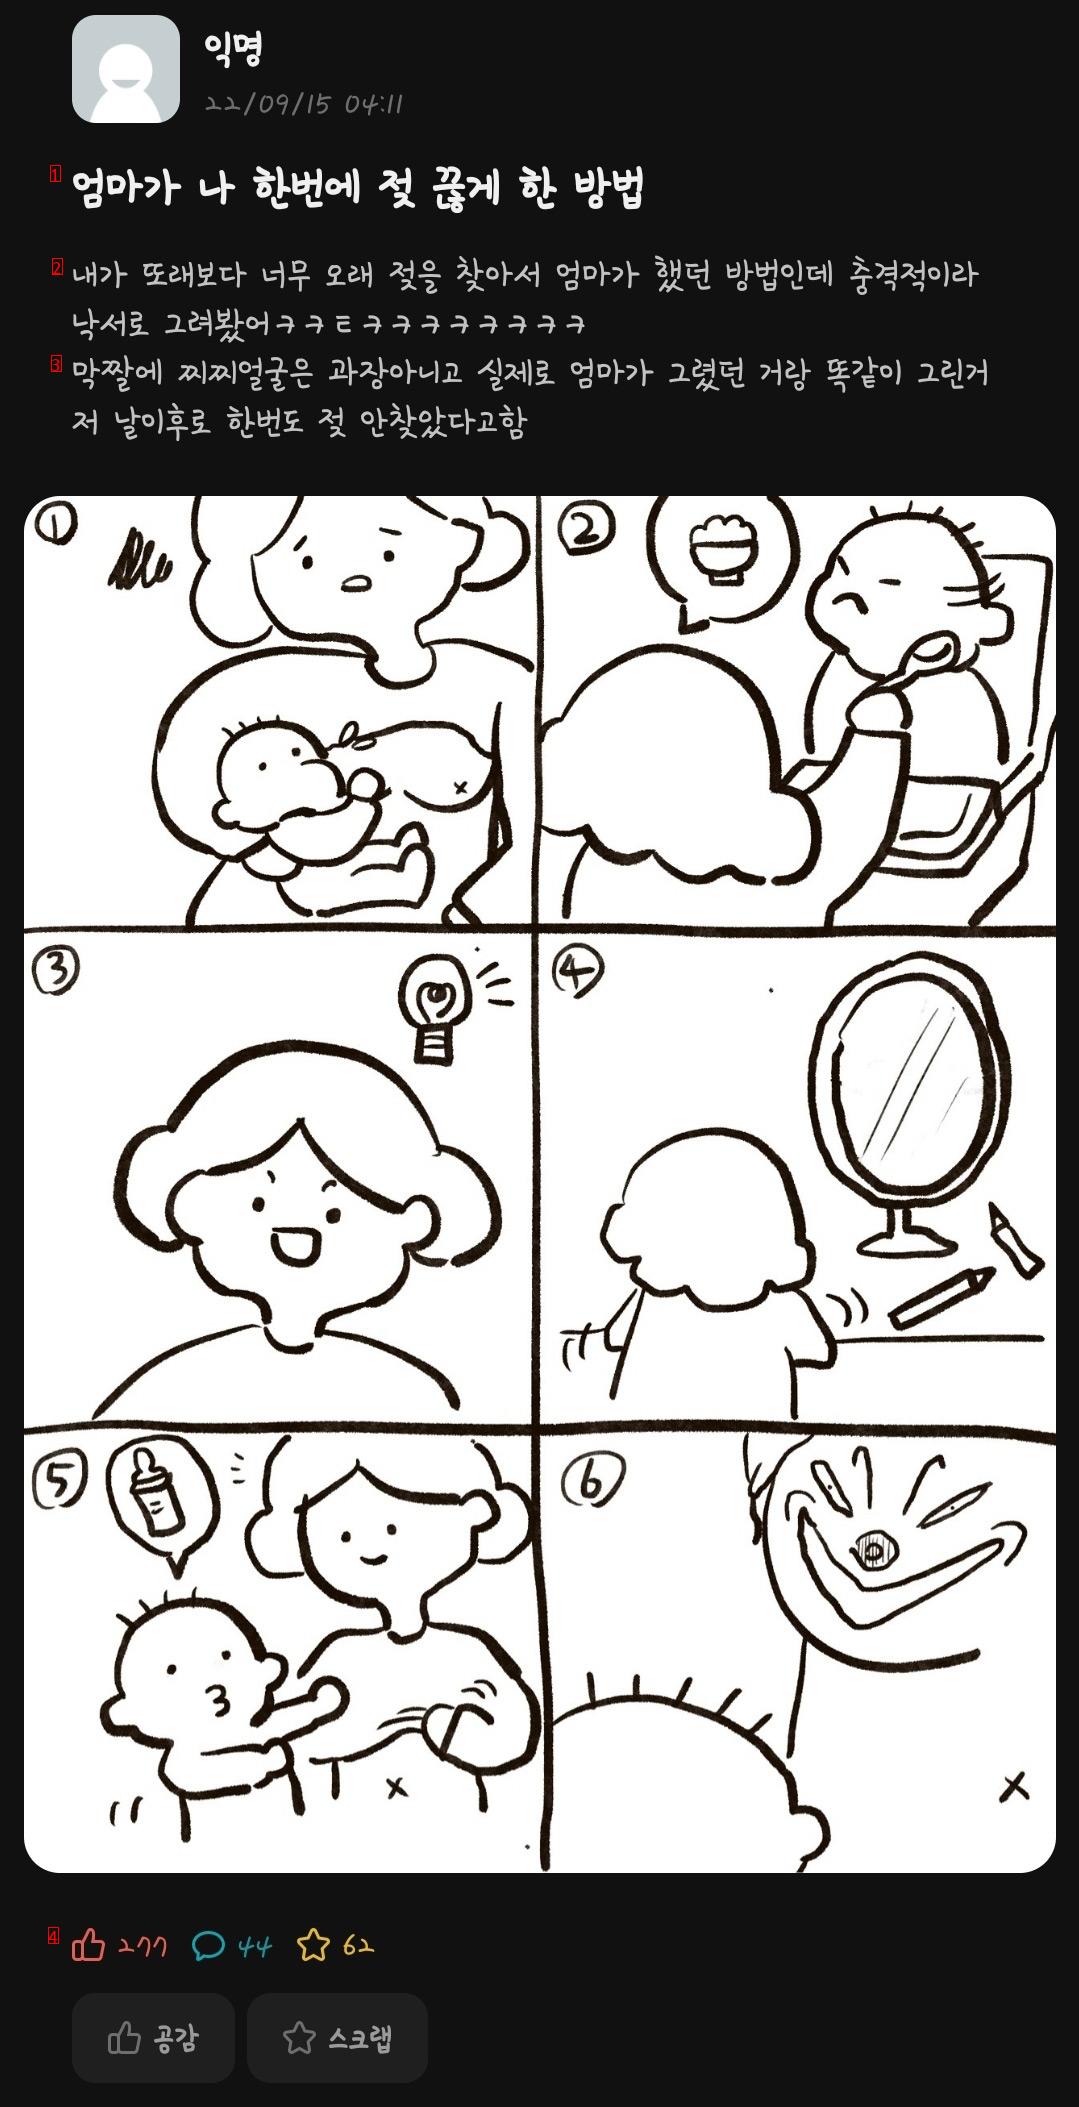 How to make a baby stop breastfeeding